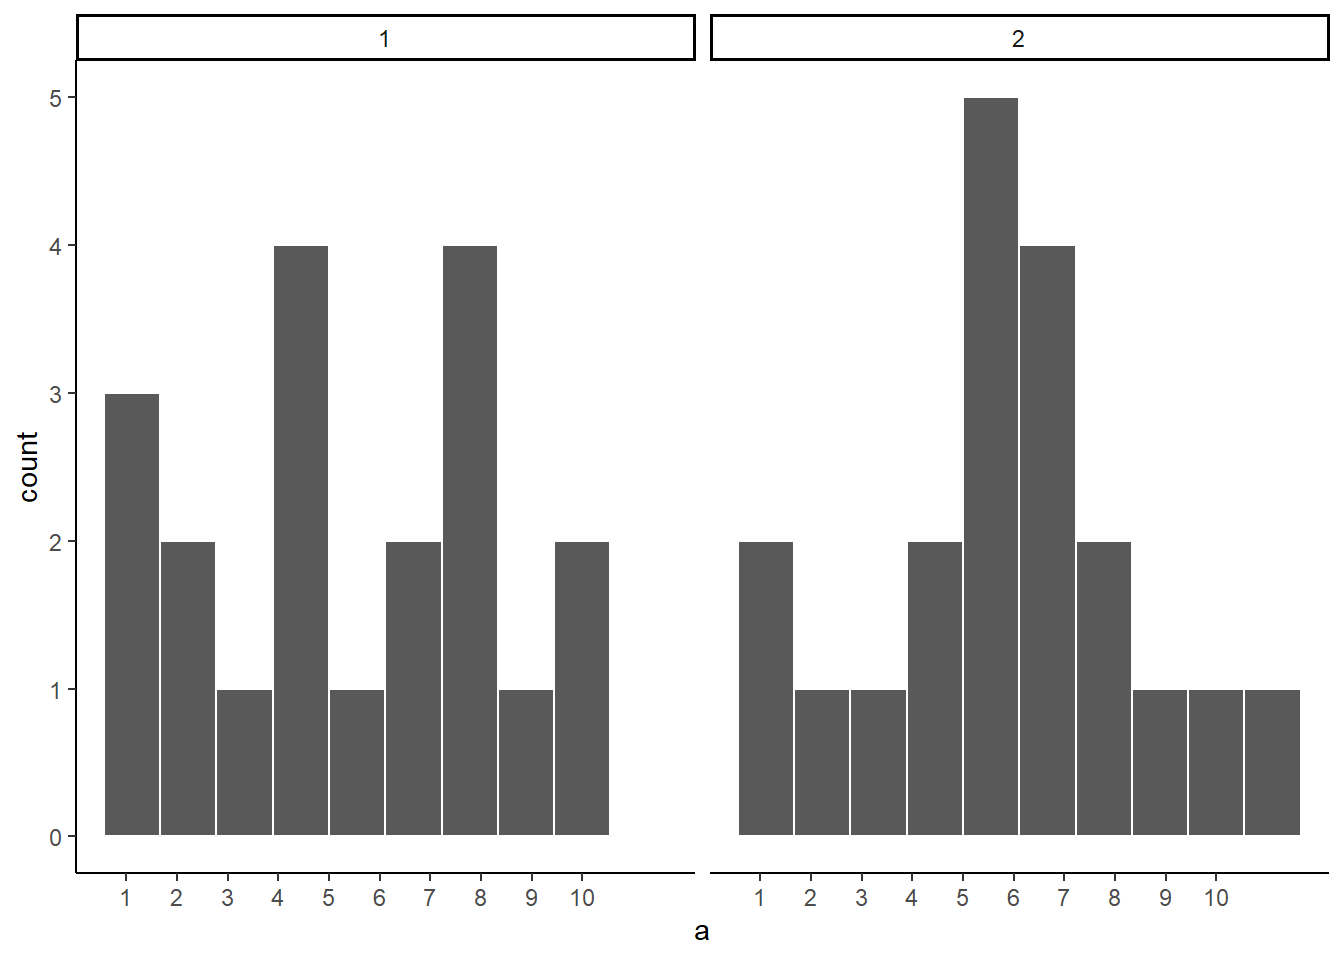 Which of these samples came from a uniform distribution?